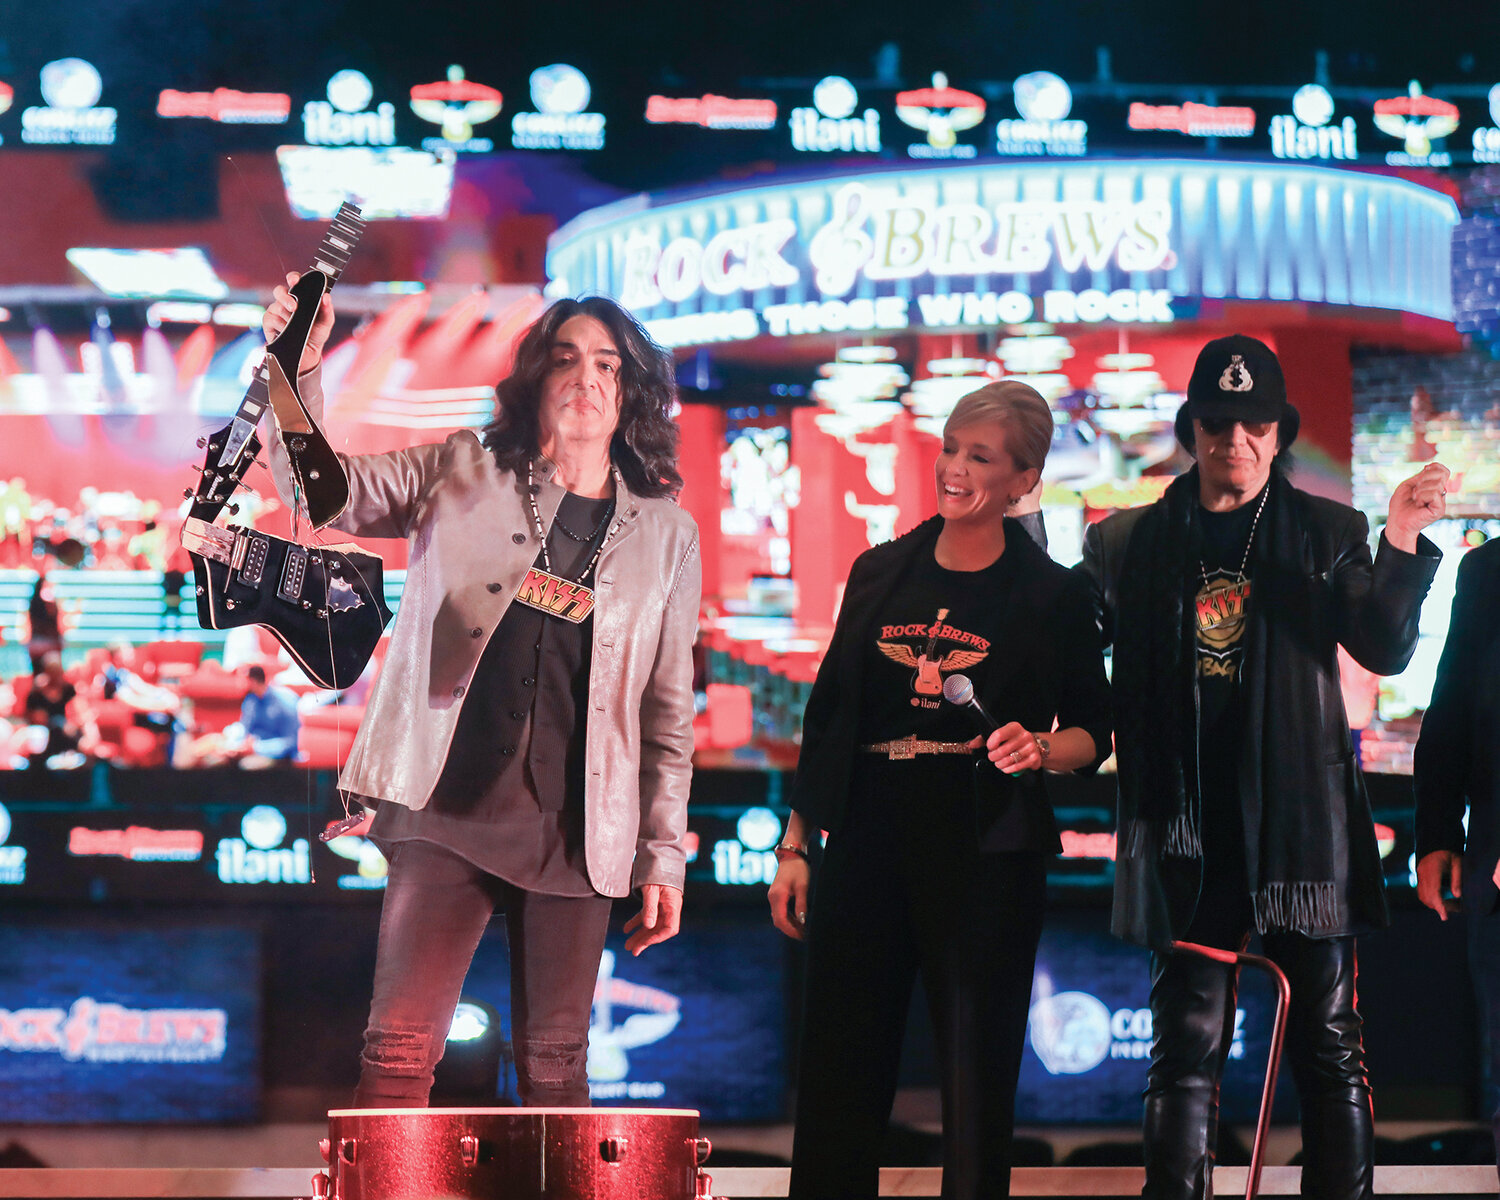 Rock and Brews co-founder and co-lead singer of Kiss Paul Stanley, holds a guitar he smashed at the end of the groundbreaking ceremony for a planned restaurant at ilani Casino in Ridgefield on Tuesday, Nov. 7.